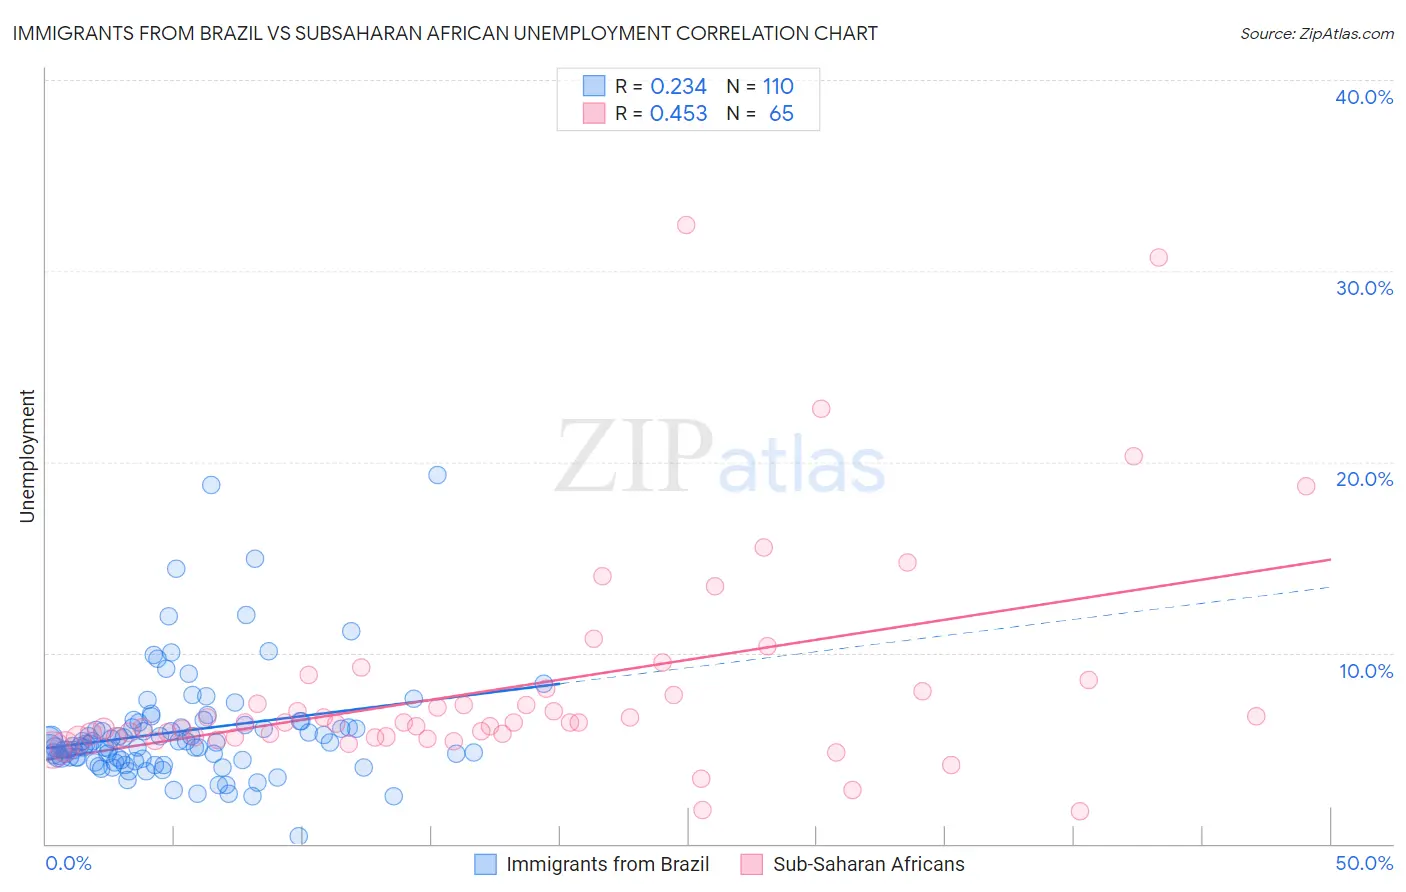 Immigrants from Brazil vs Subsaharan African Unemployment